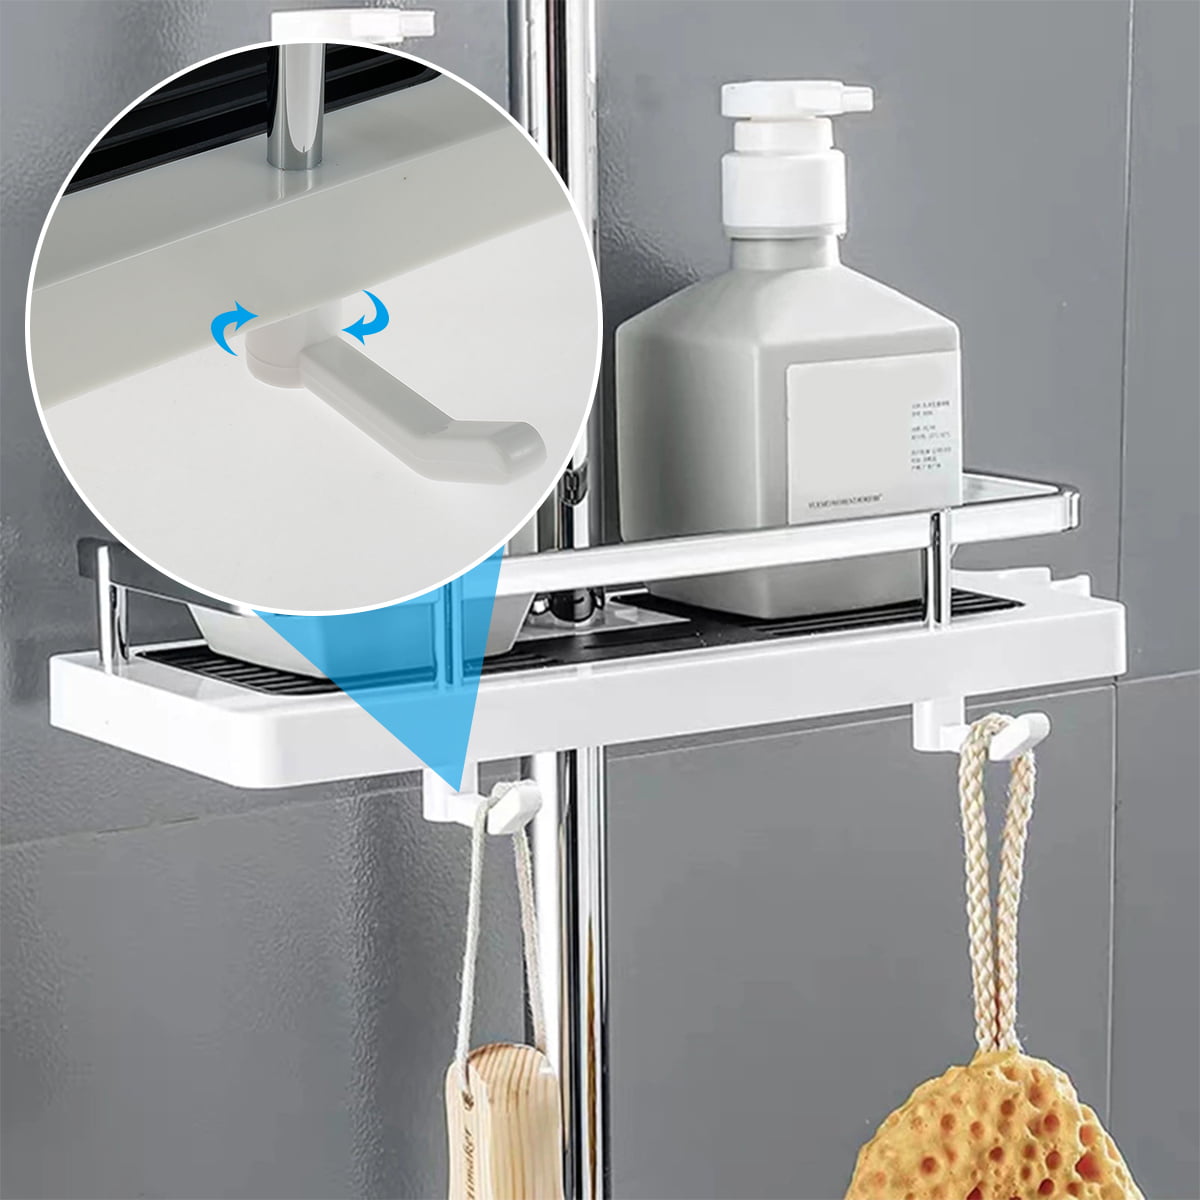 Household Tools Shower Rack Punch-free Shower Caddy Shelves Slide Bar for  Shower Head, Shampoo, Soap HolderSuitcase,with Stainless Steel Guardrail,  Shower Shelves on Clearance 